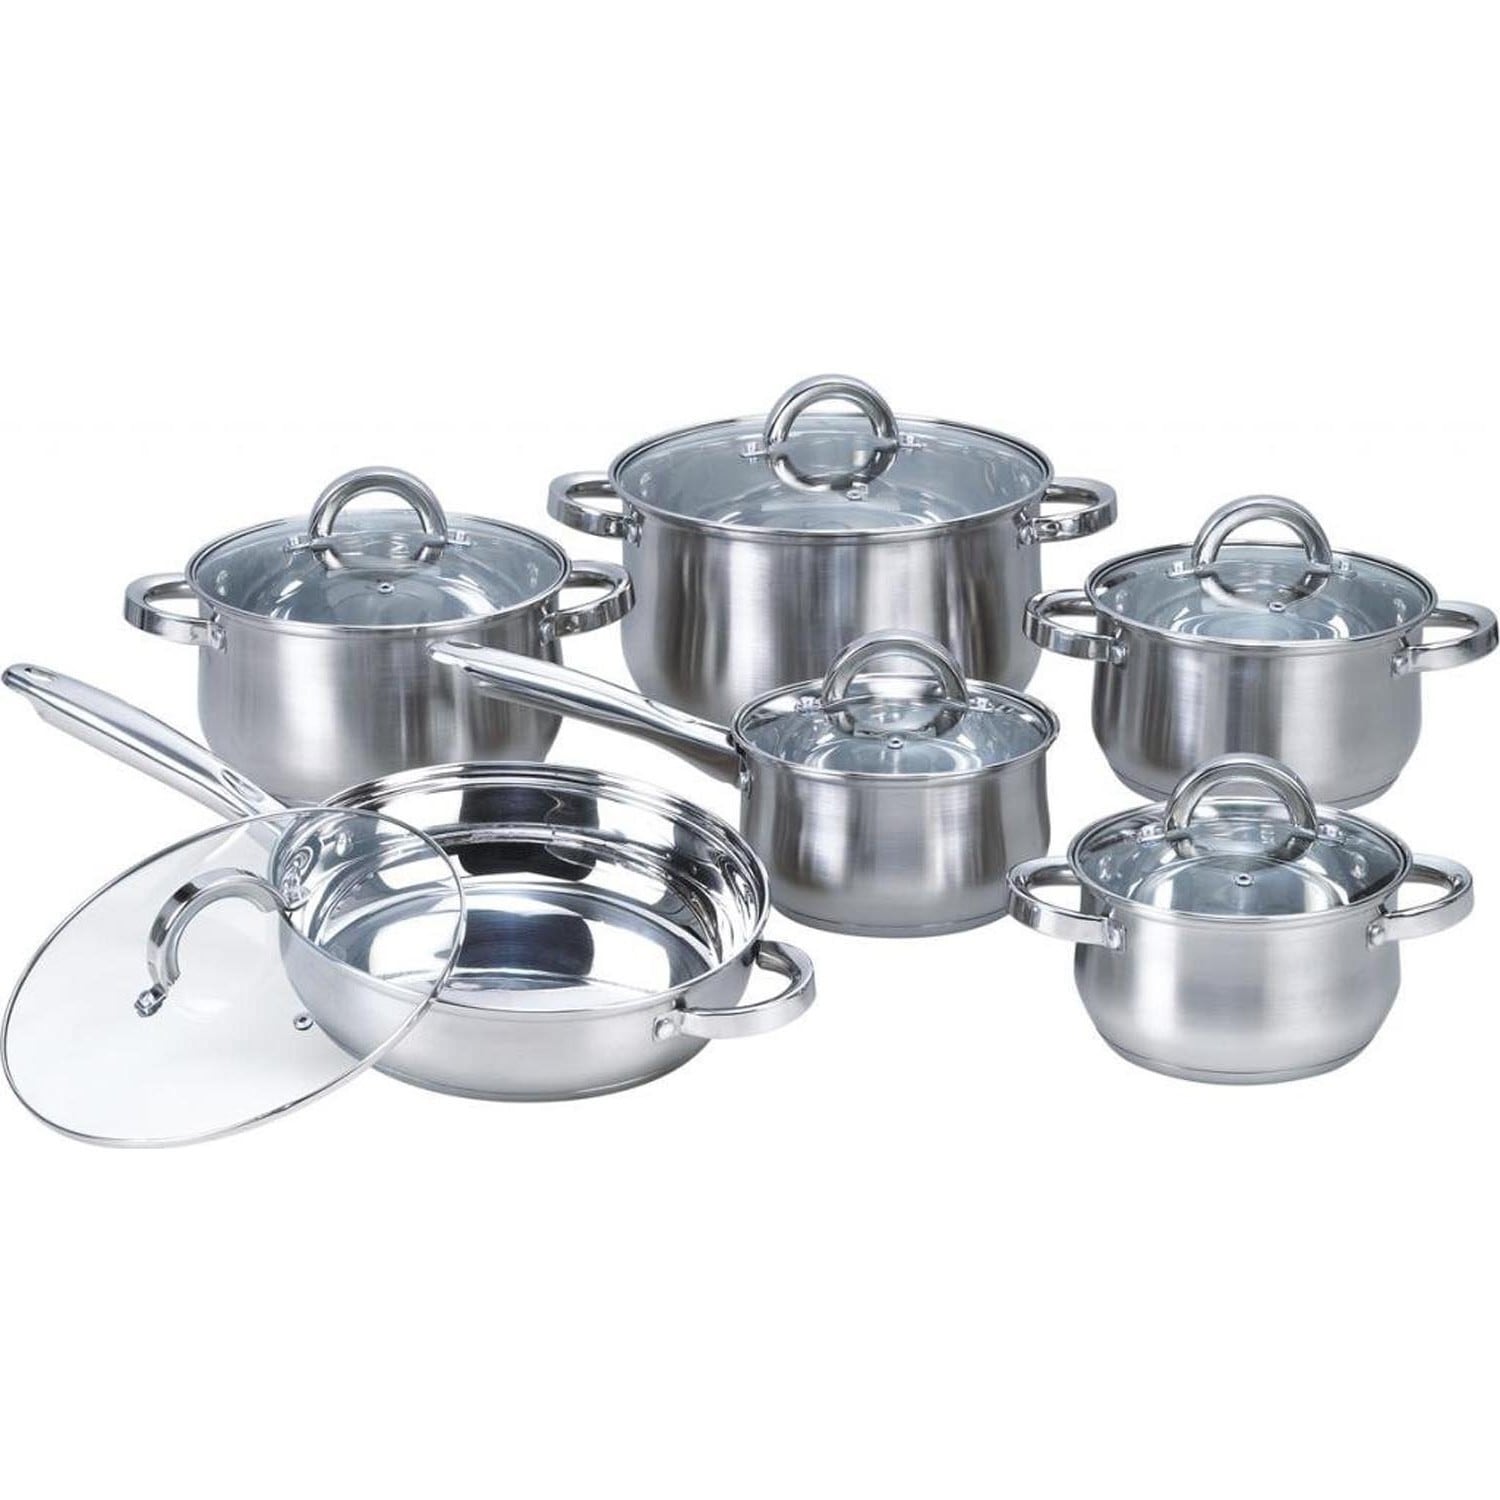 https://ak1.ostkcdn.com/images/products/is/images/direct/9d251d8080db13360737dc40a10dec66f9121b05/12-Piece-Stainless-Steel-Cookware-Set.jpg